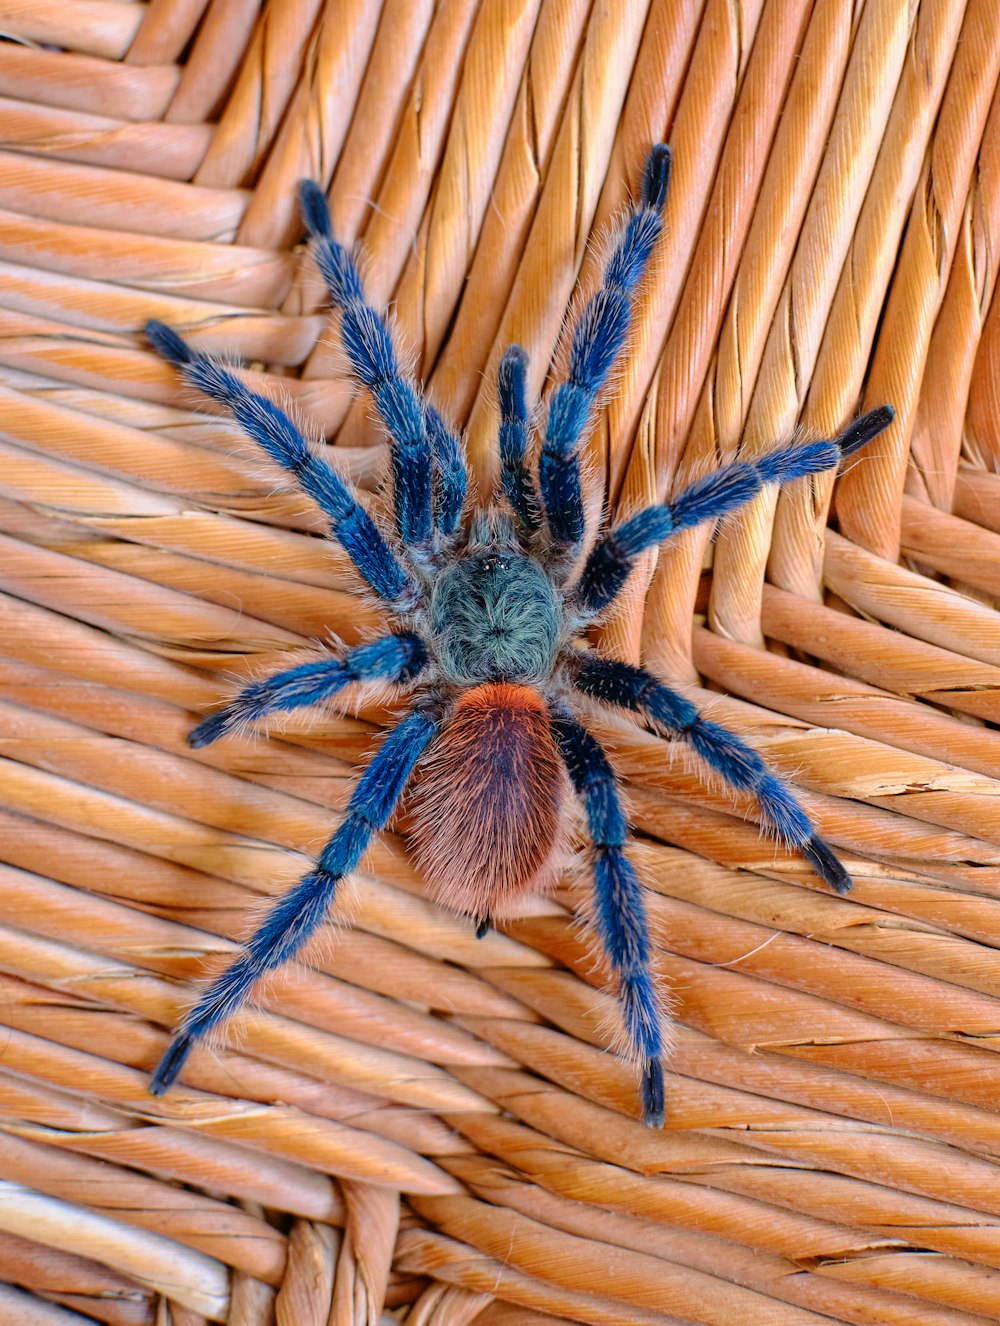 a large blue spider sitting on top of a wicker basket